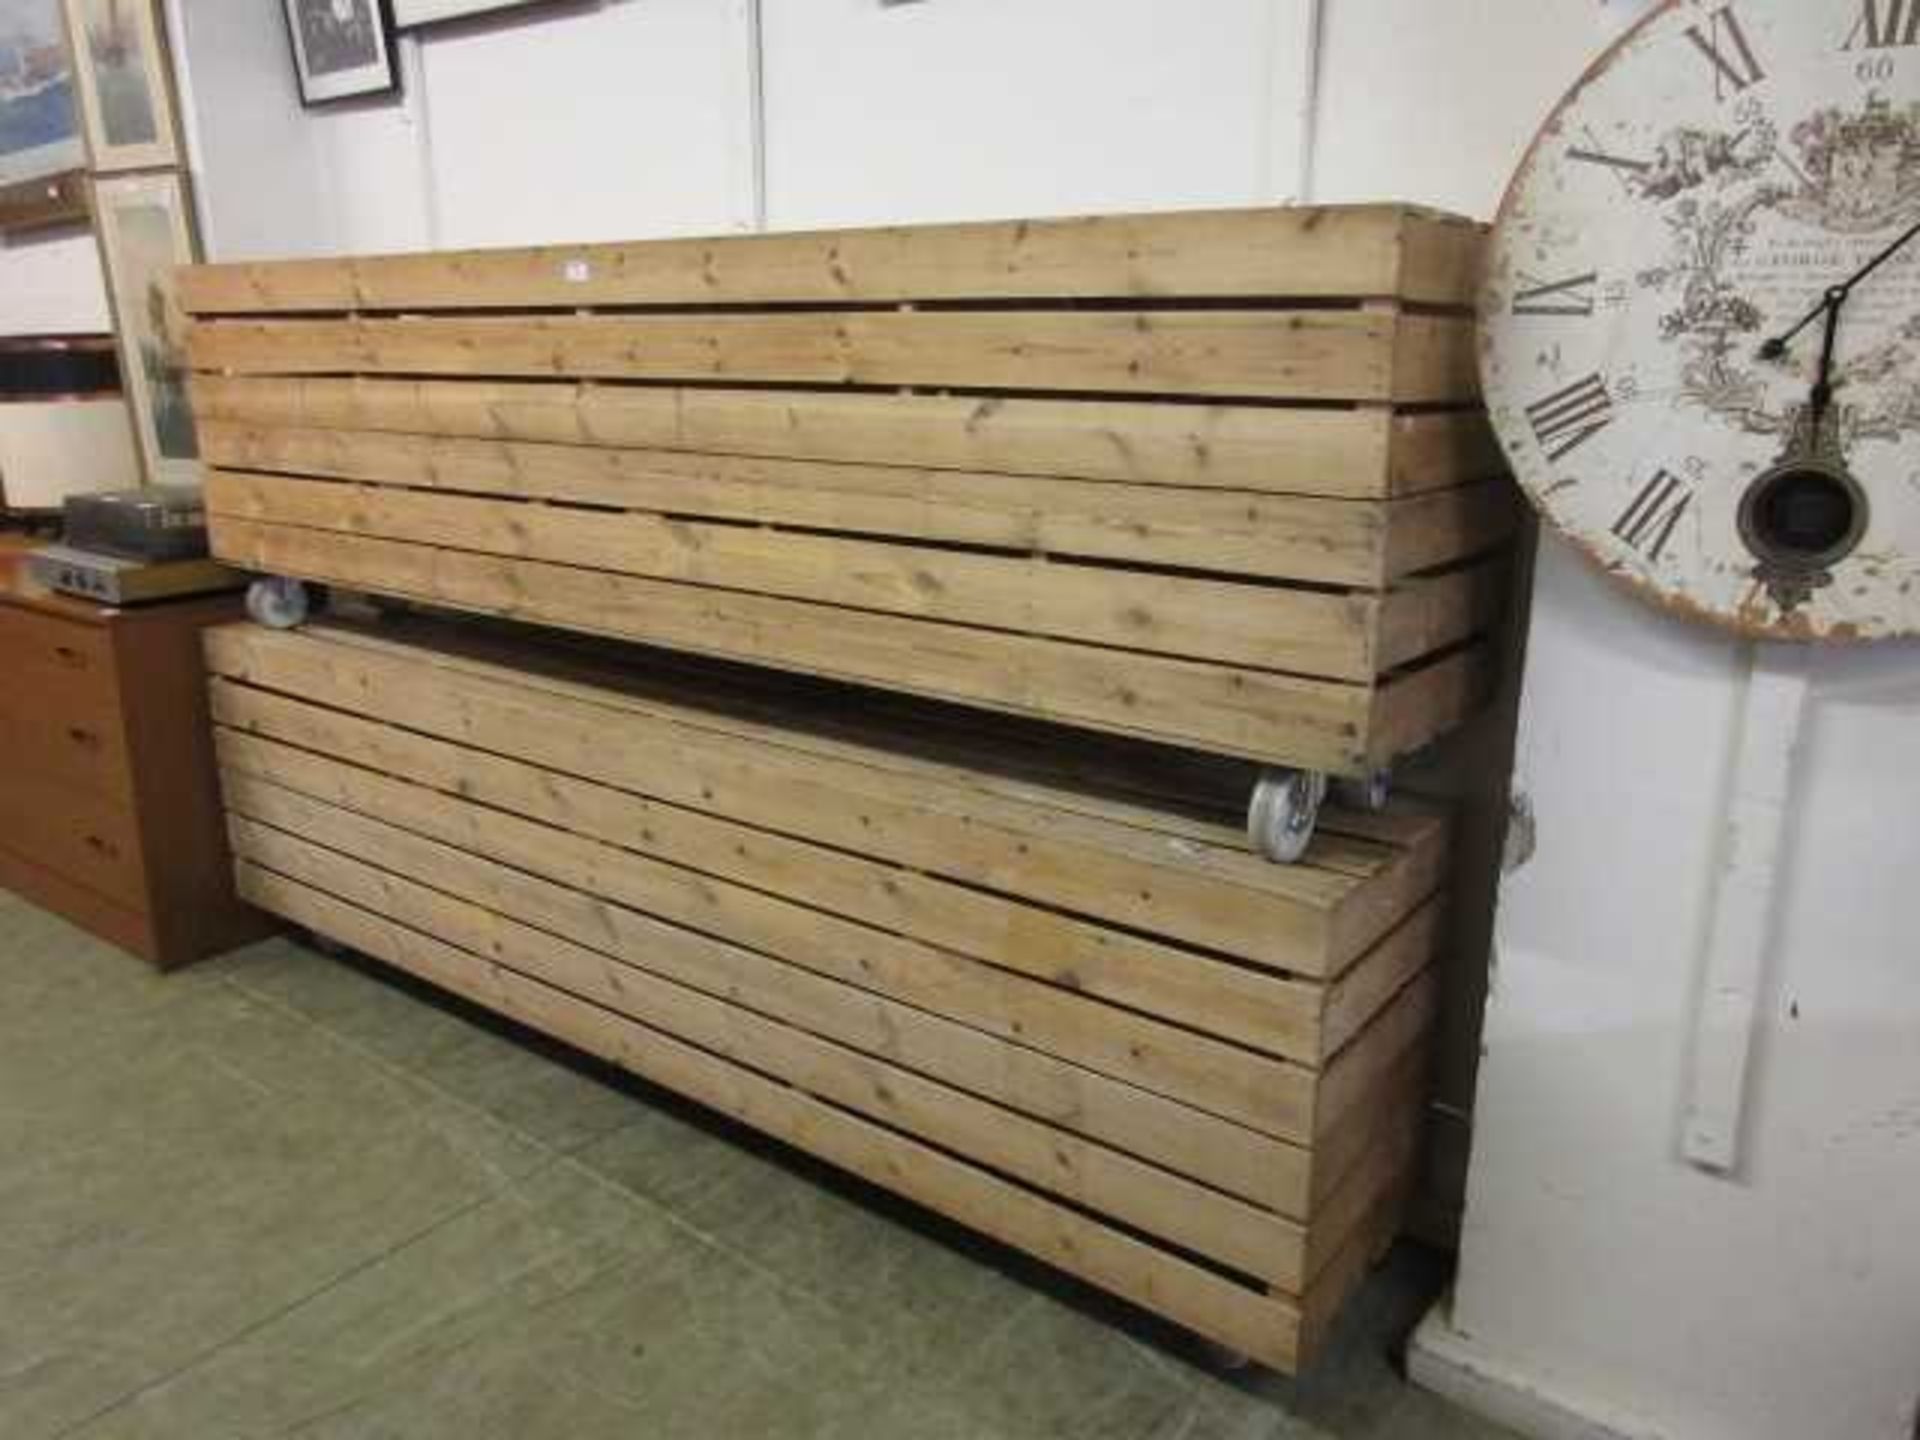 Two slatted pine garden benches on casters